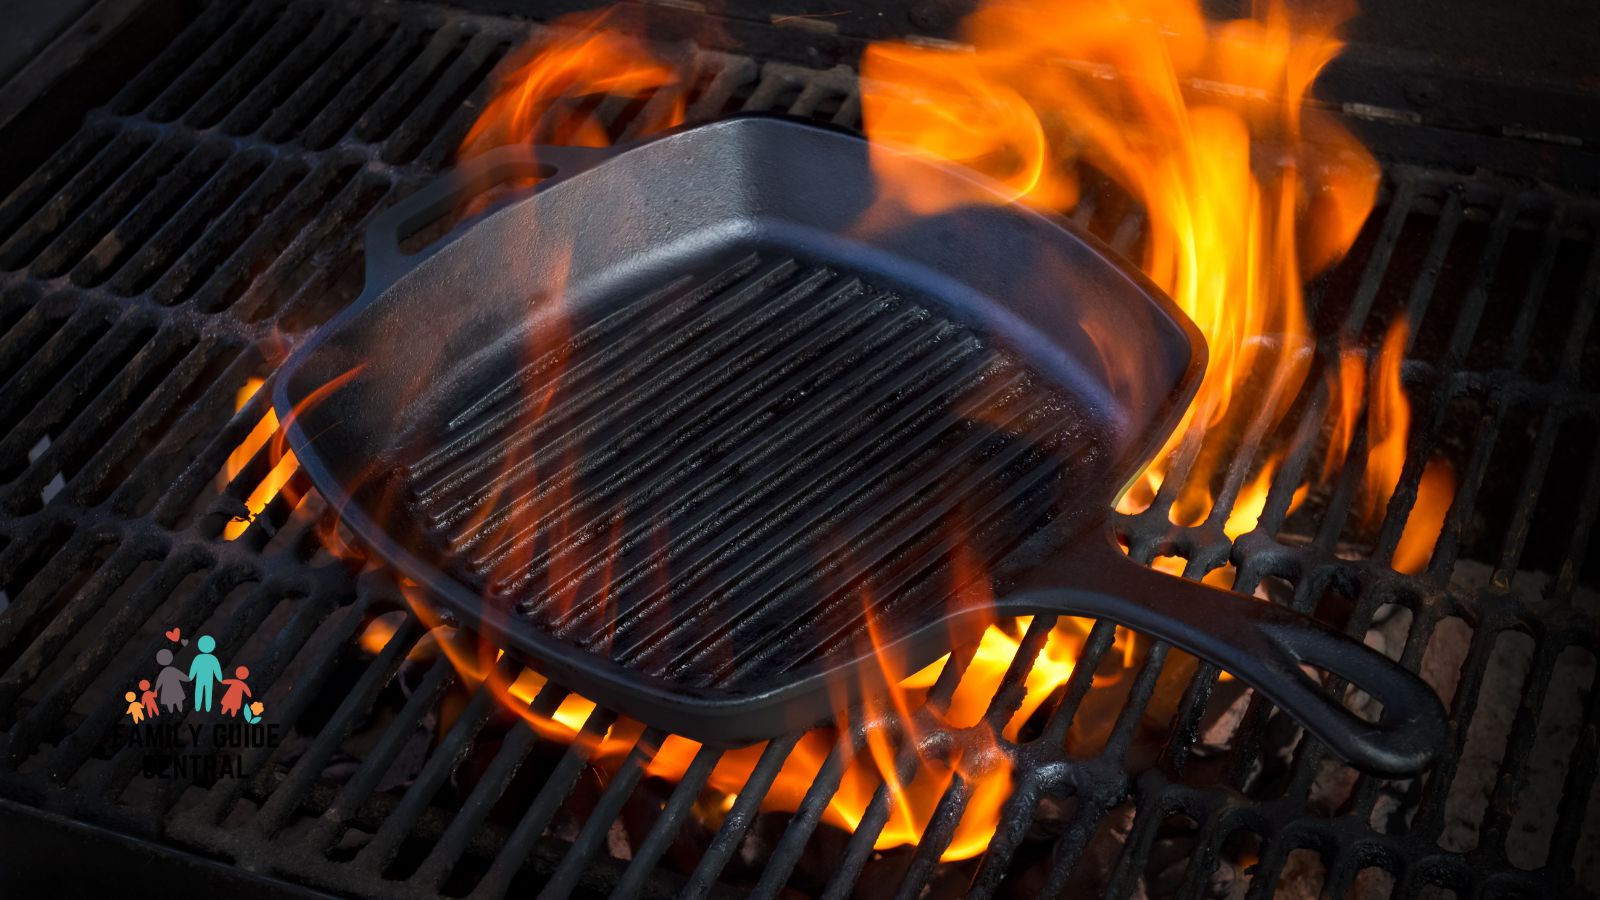 Cast iron on a grill - familyguidecentral.com